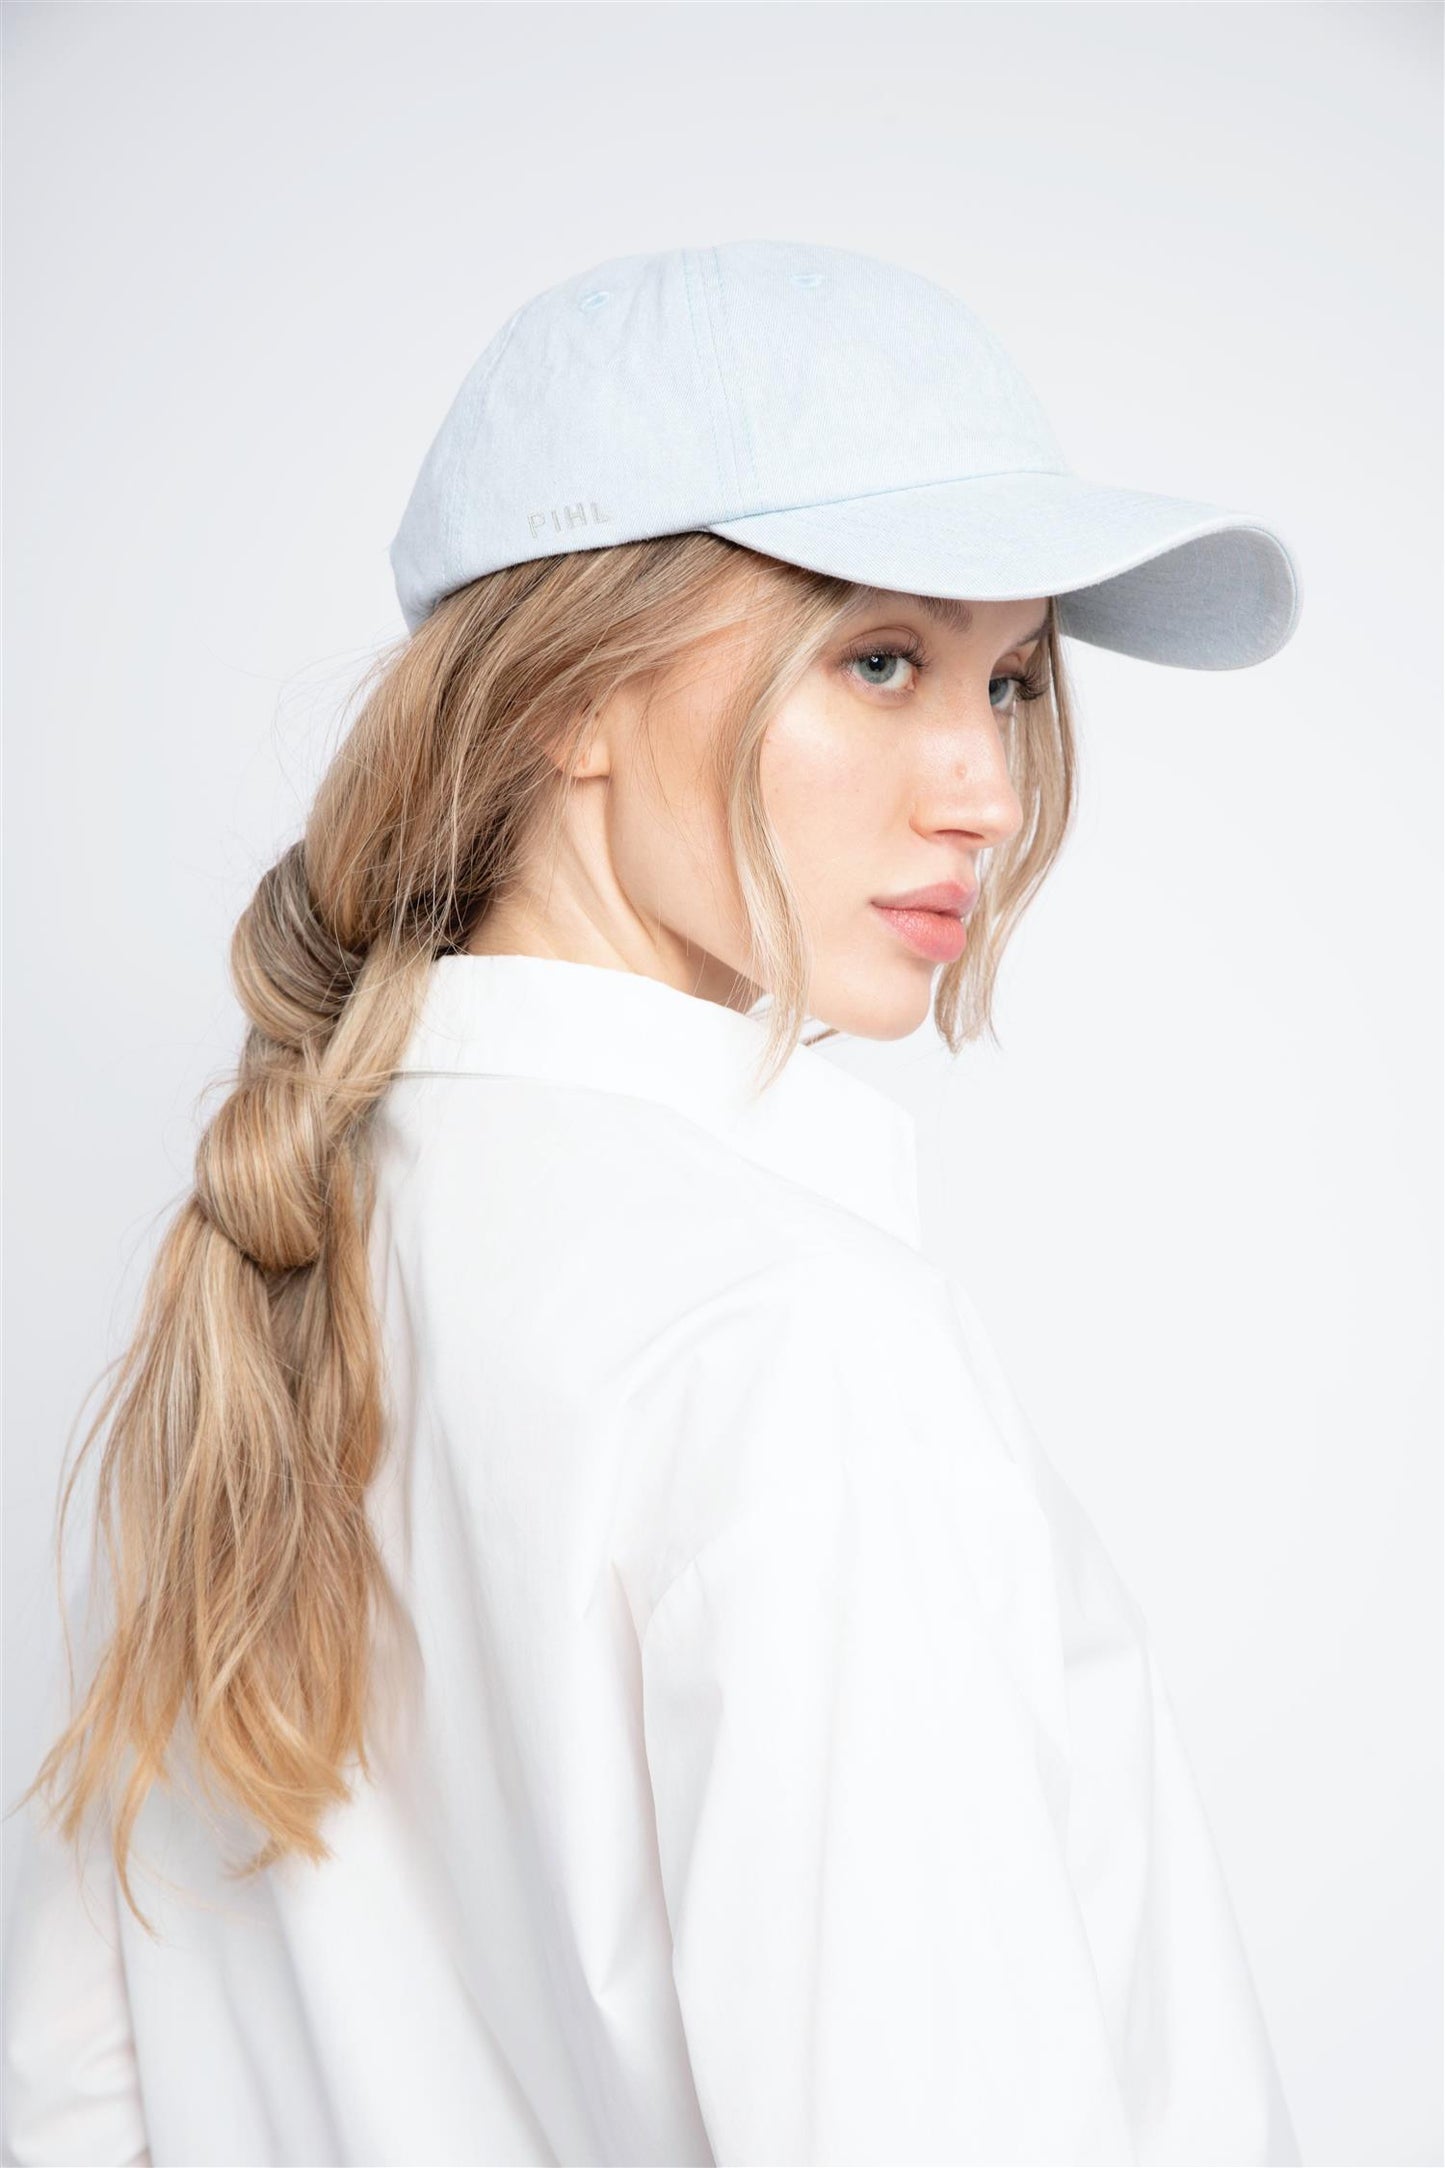 Lily Cap -washed light blue